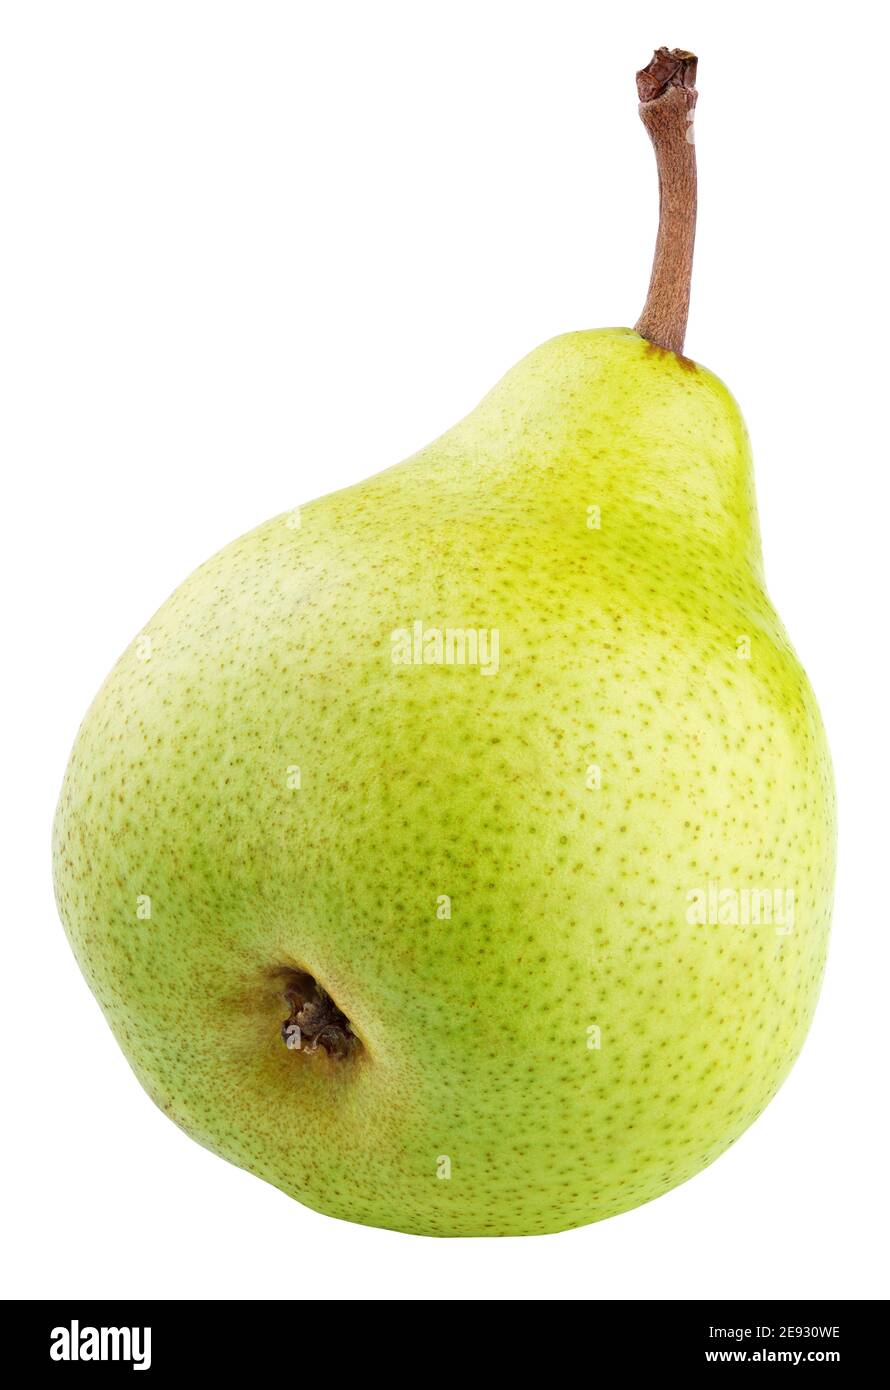 Green pear fruit isolated on white background with clipping path. Full depth of field. Stock Photo